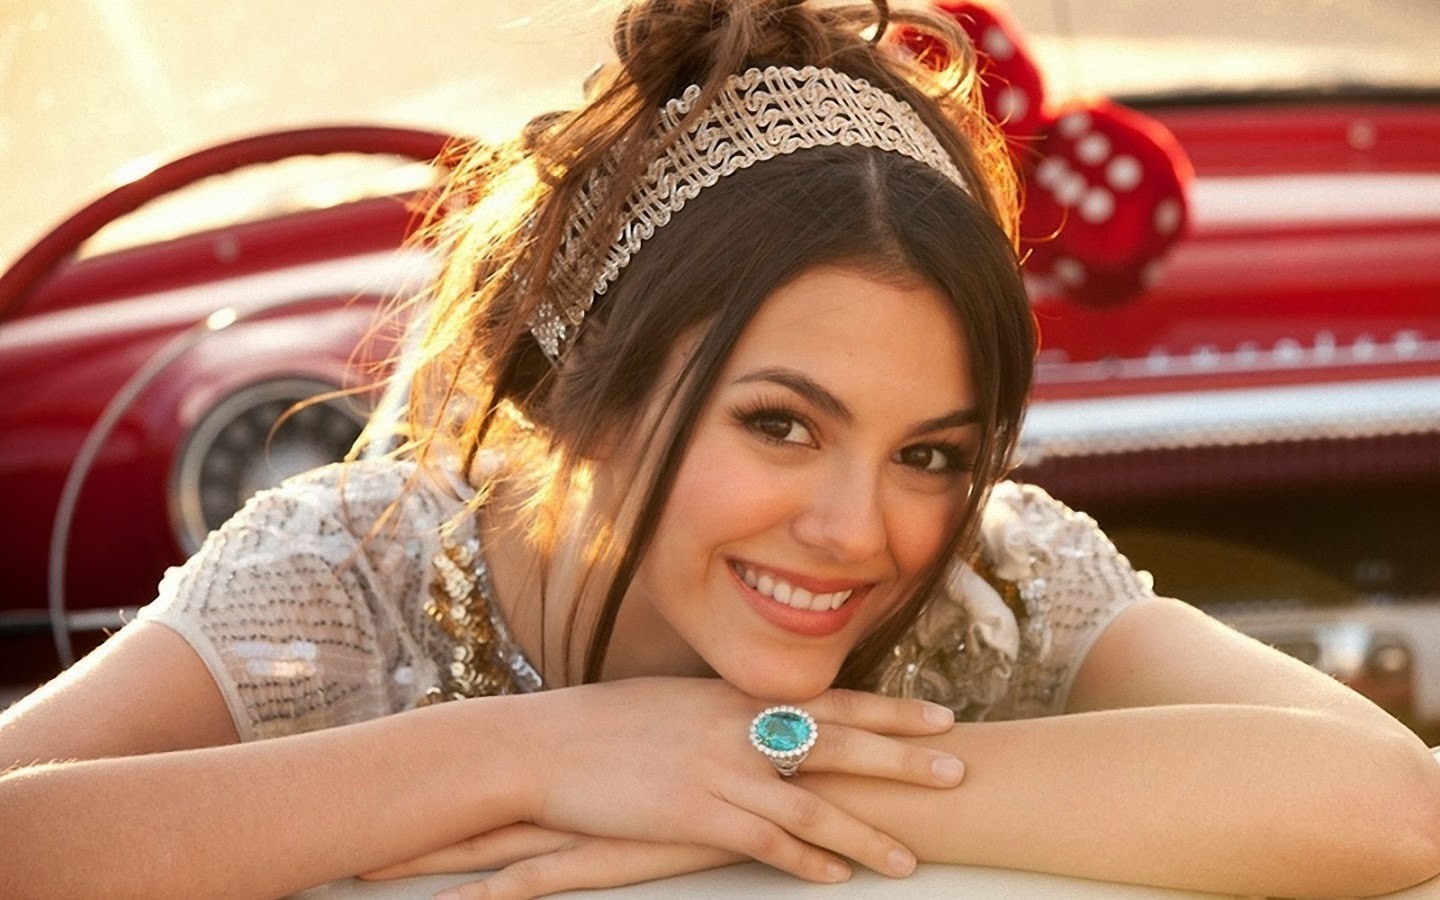 People 1440x900 women model brunette long hair looking at viewer face Victoria Justice smiling car interior cabrio headband sunlight brown eyes rings